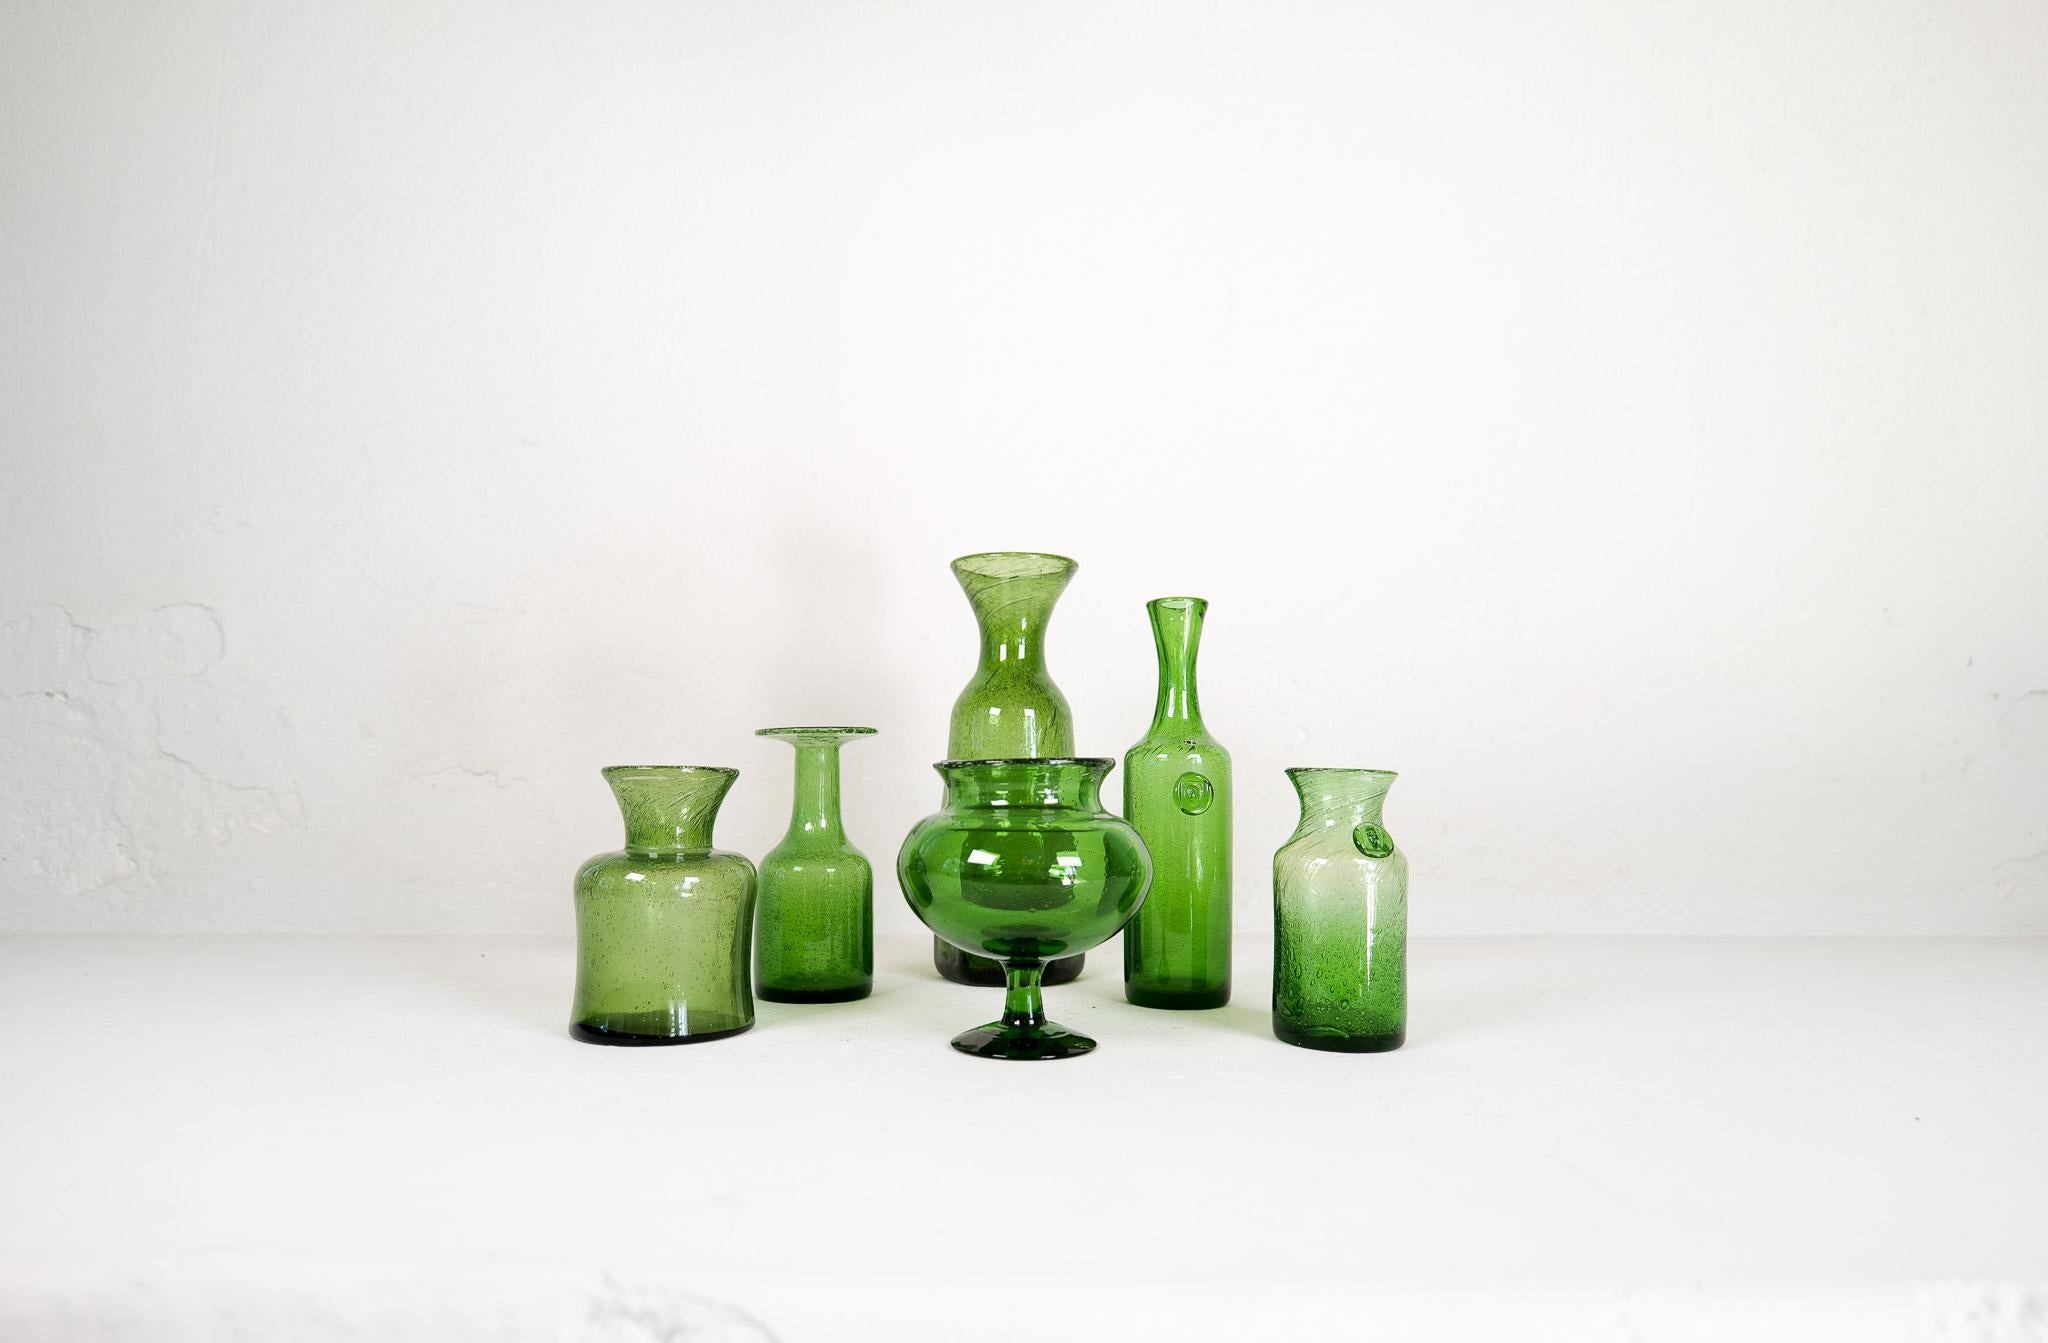 Collection of six green glass vases/vessels designed by Erik Höglund. Hand blown at Boda glass hut during the 1960s. They are all different sizes and shapes in very good to excellent condition. They are made in the typical method of Höglund where